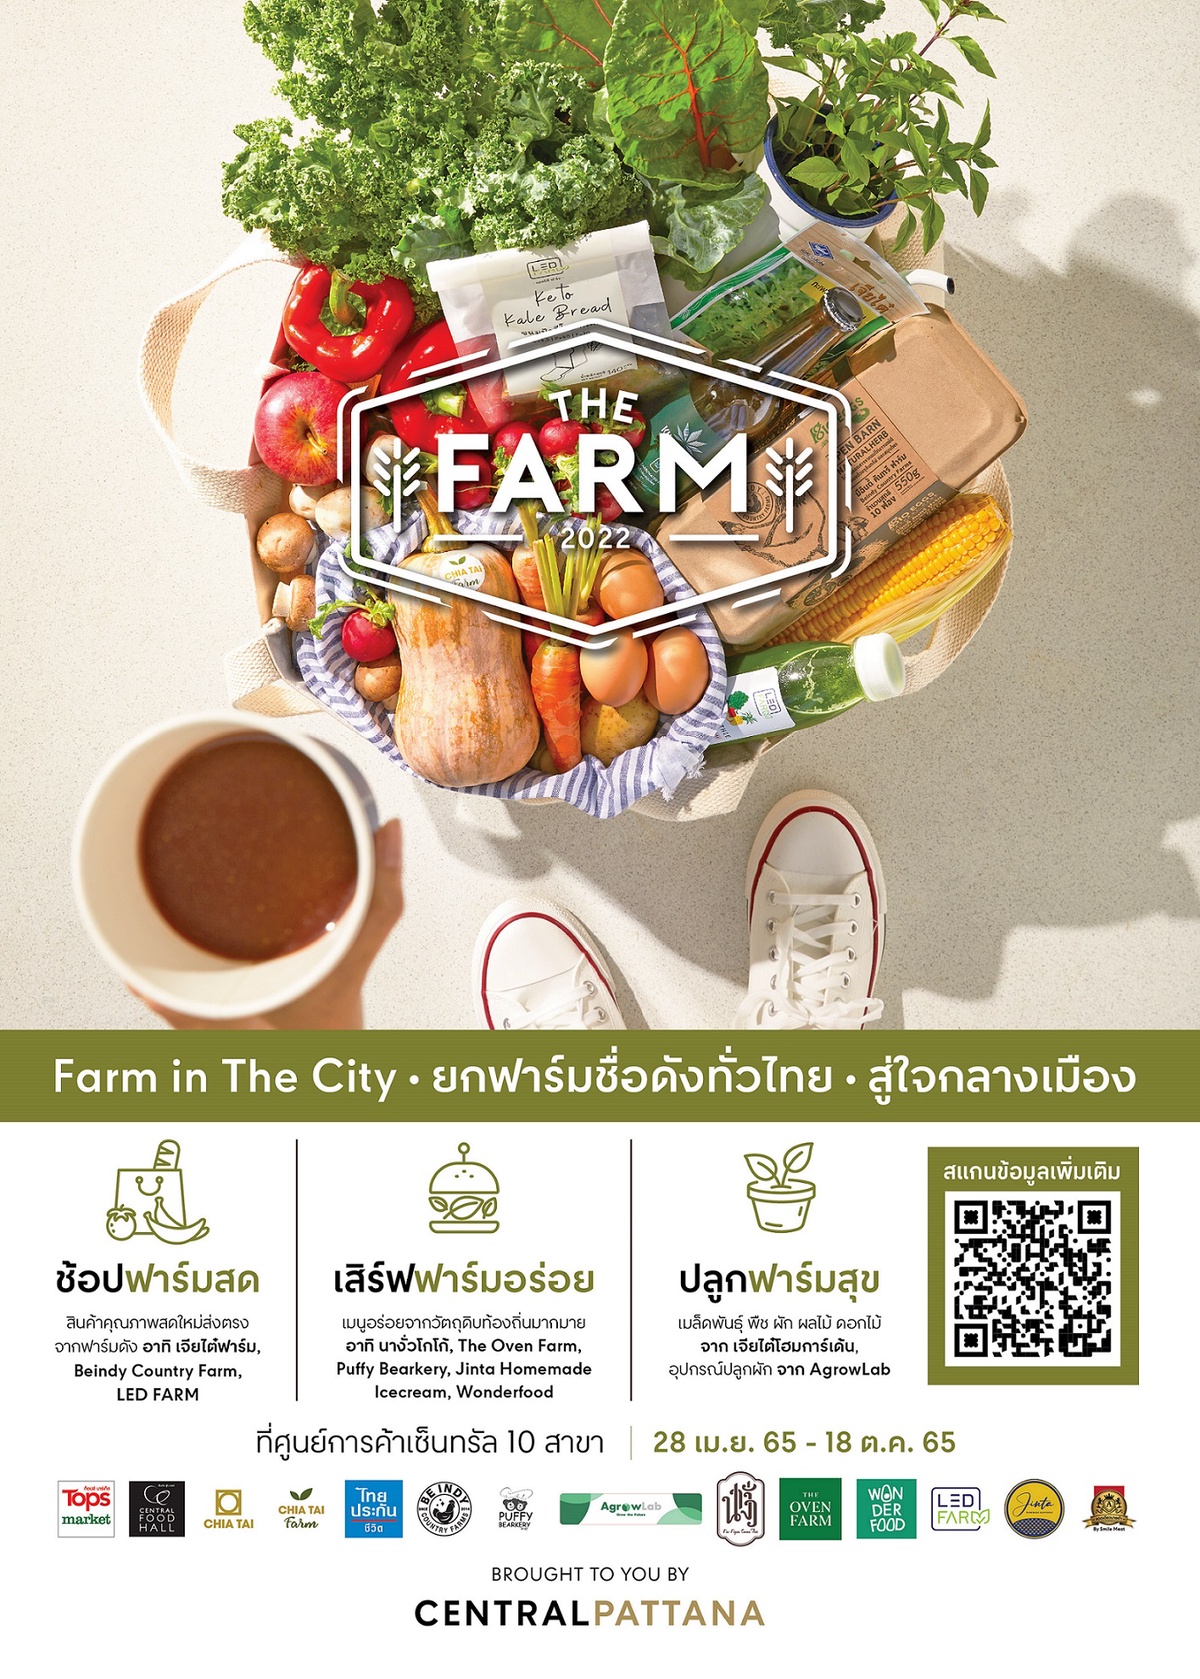 Central Pattana presents 'THE FARM 2022' bringing together high-quality products, fresh and organic ingredients from well-known farms nationwide in one place from 28 April to 18 October 2022 at 10